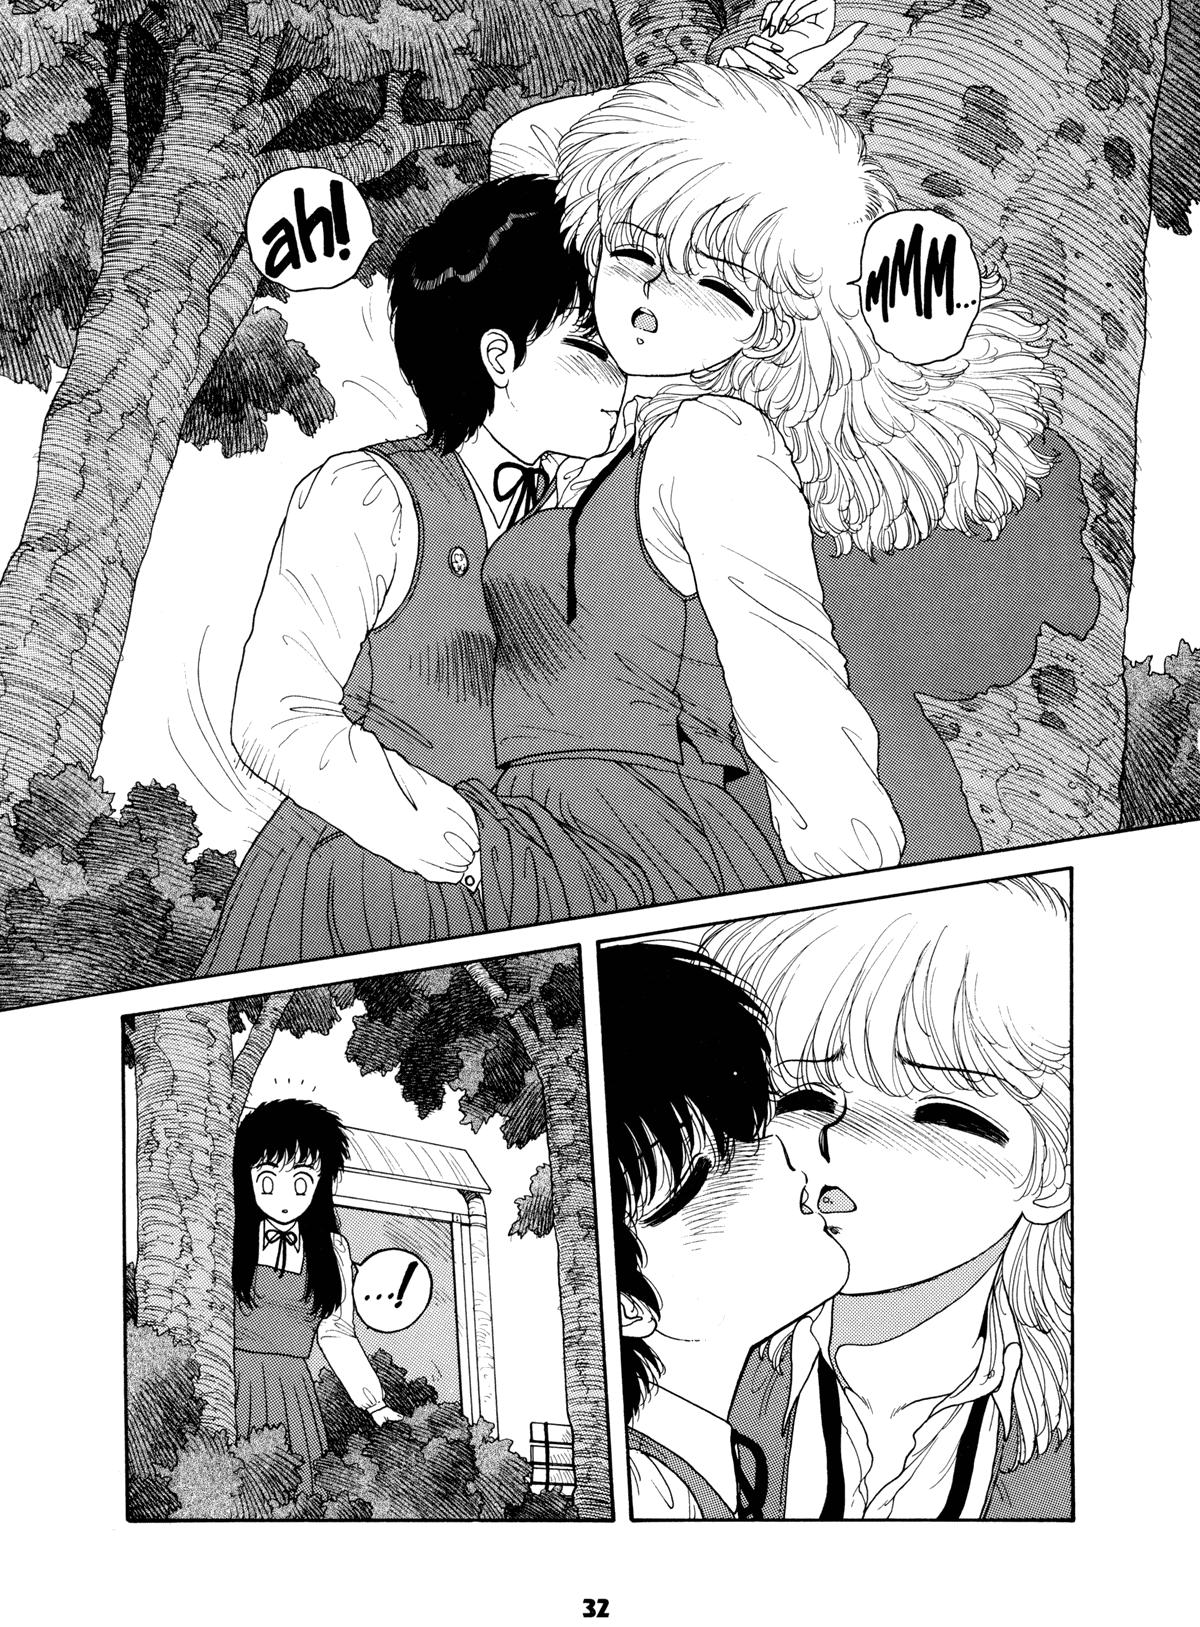 Misty Girl Extreme Page 32 Of 164 hentai comic, Misty Girl Extreme Page 32 ...